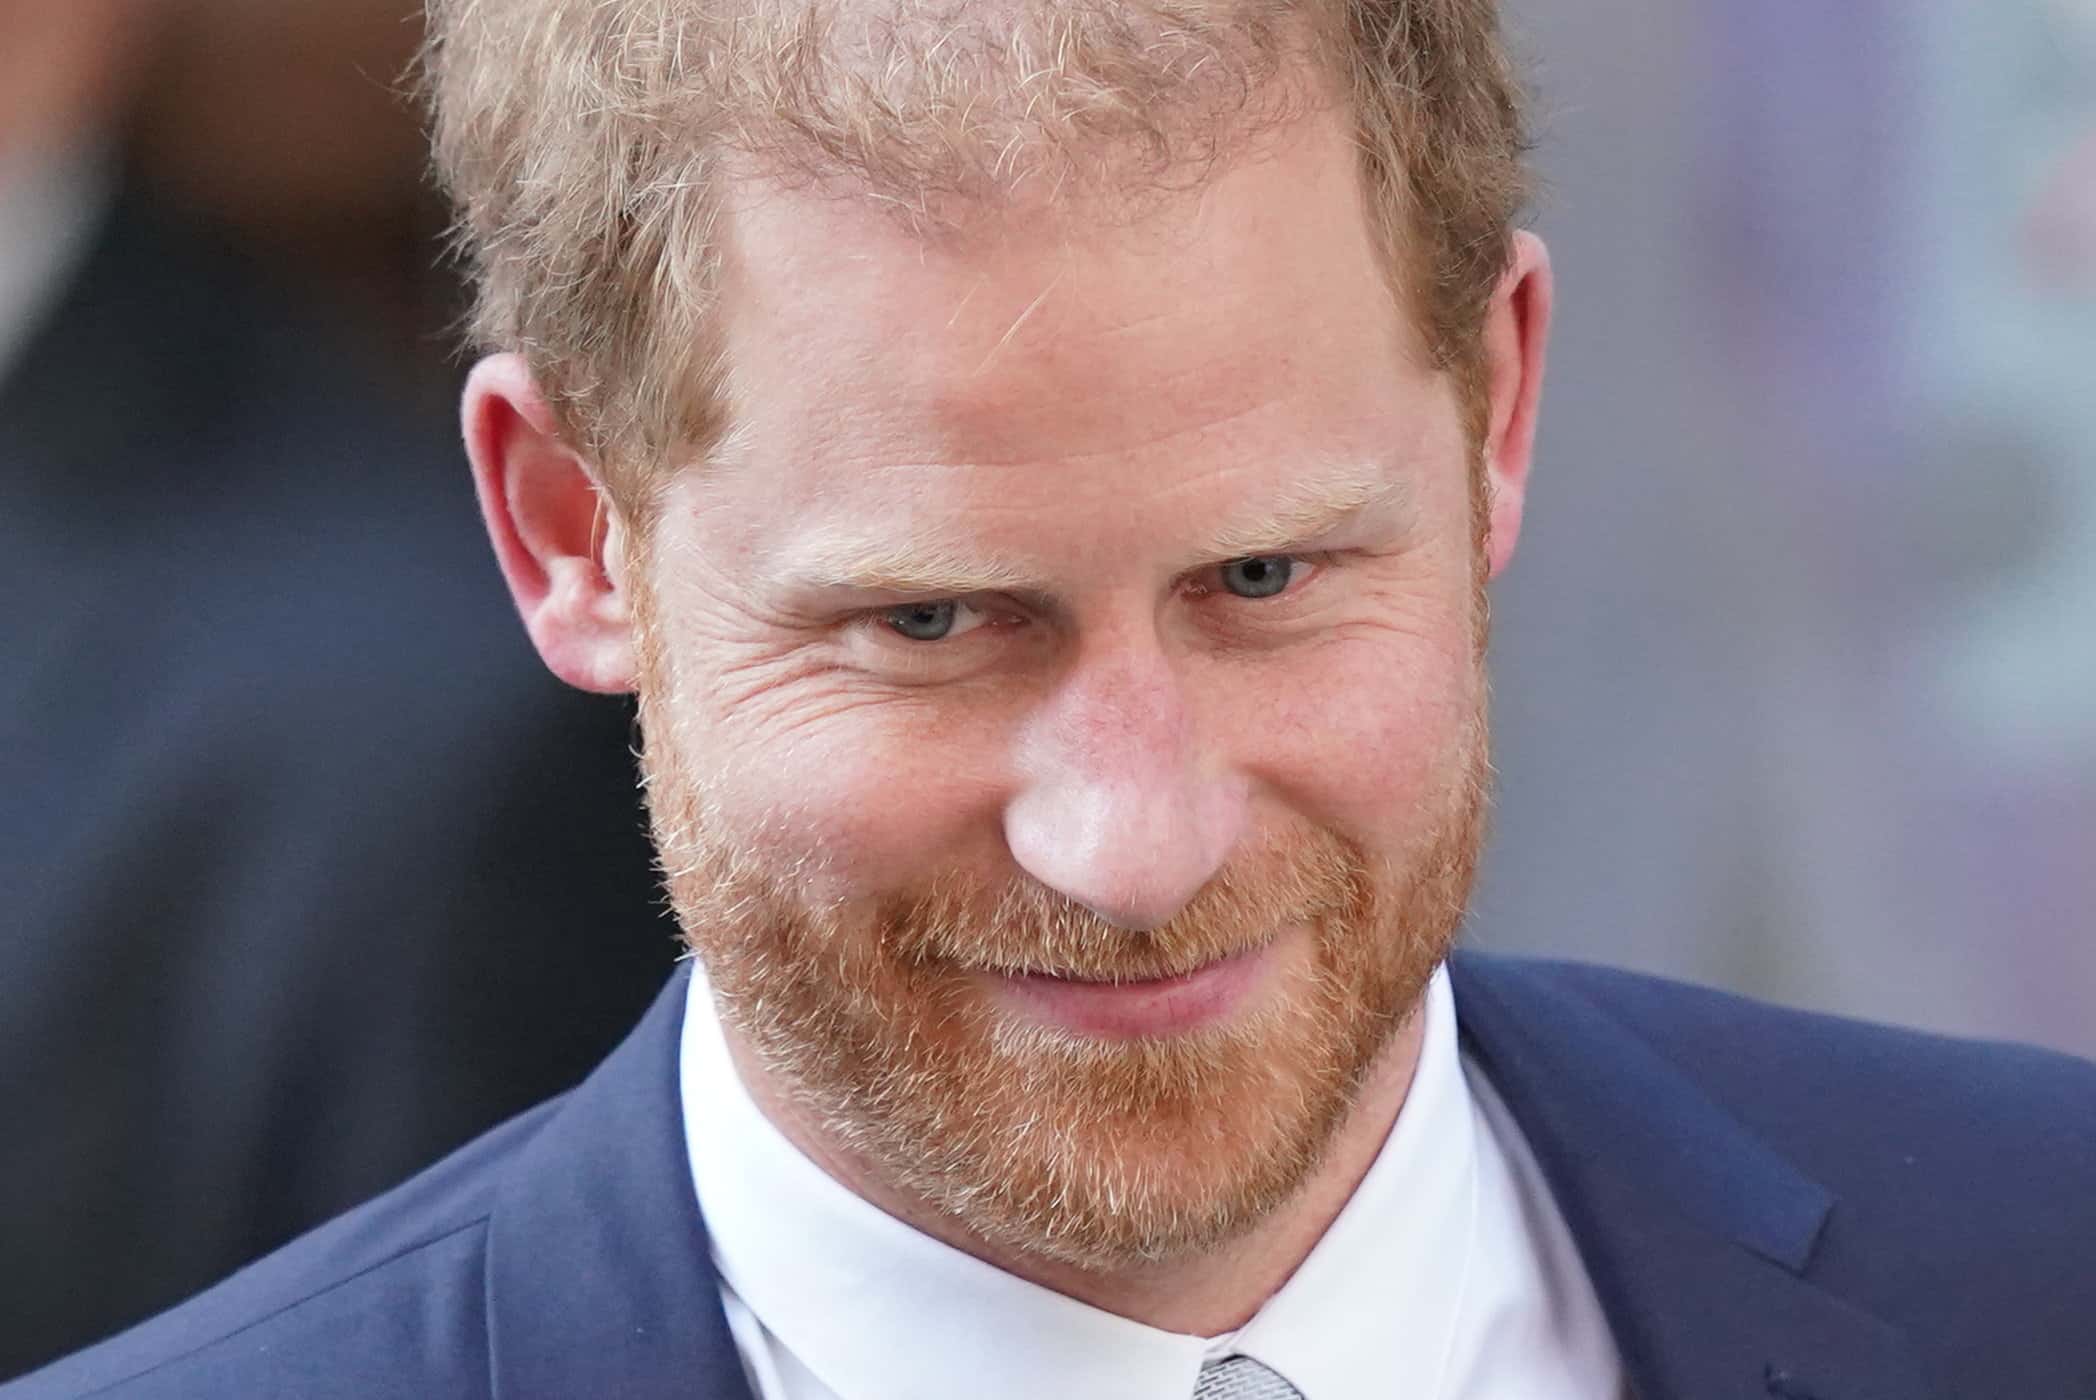 Duke of Sussex awarded £140,600 in phone hacking claim against Mirror Group